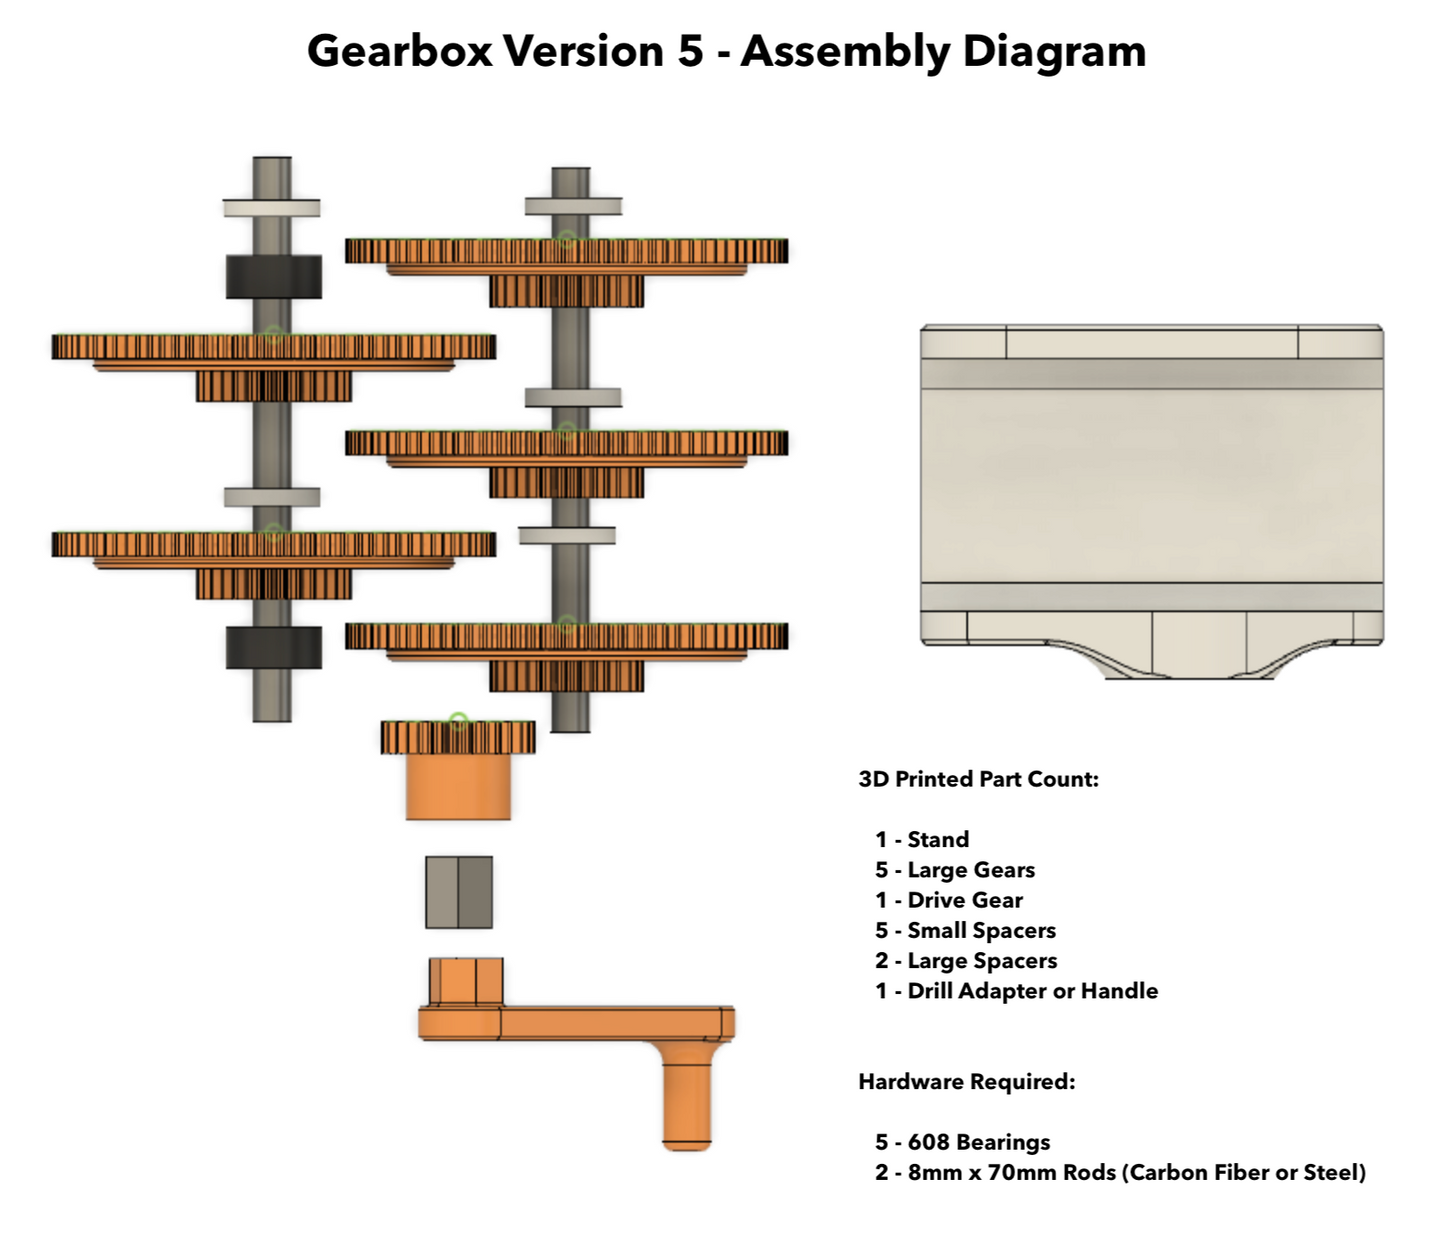 Gearboxes [243:1 ratio]